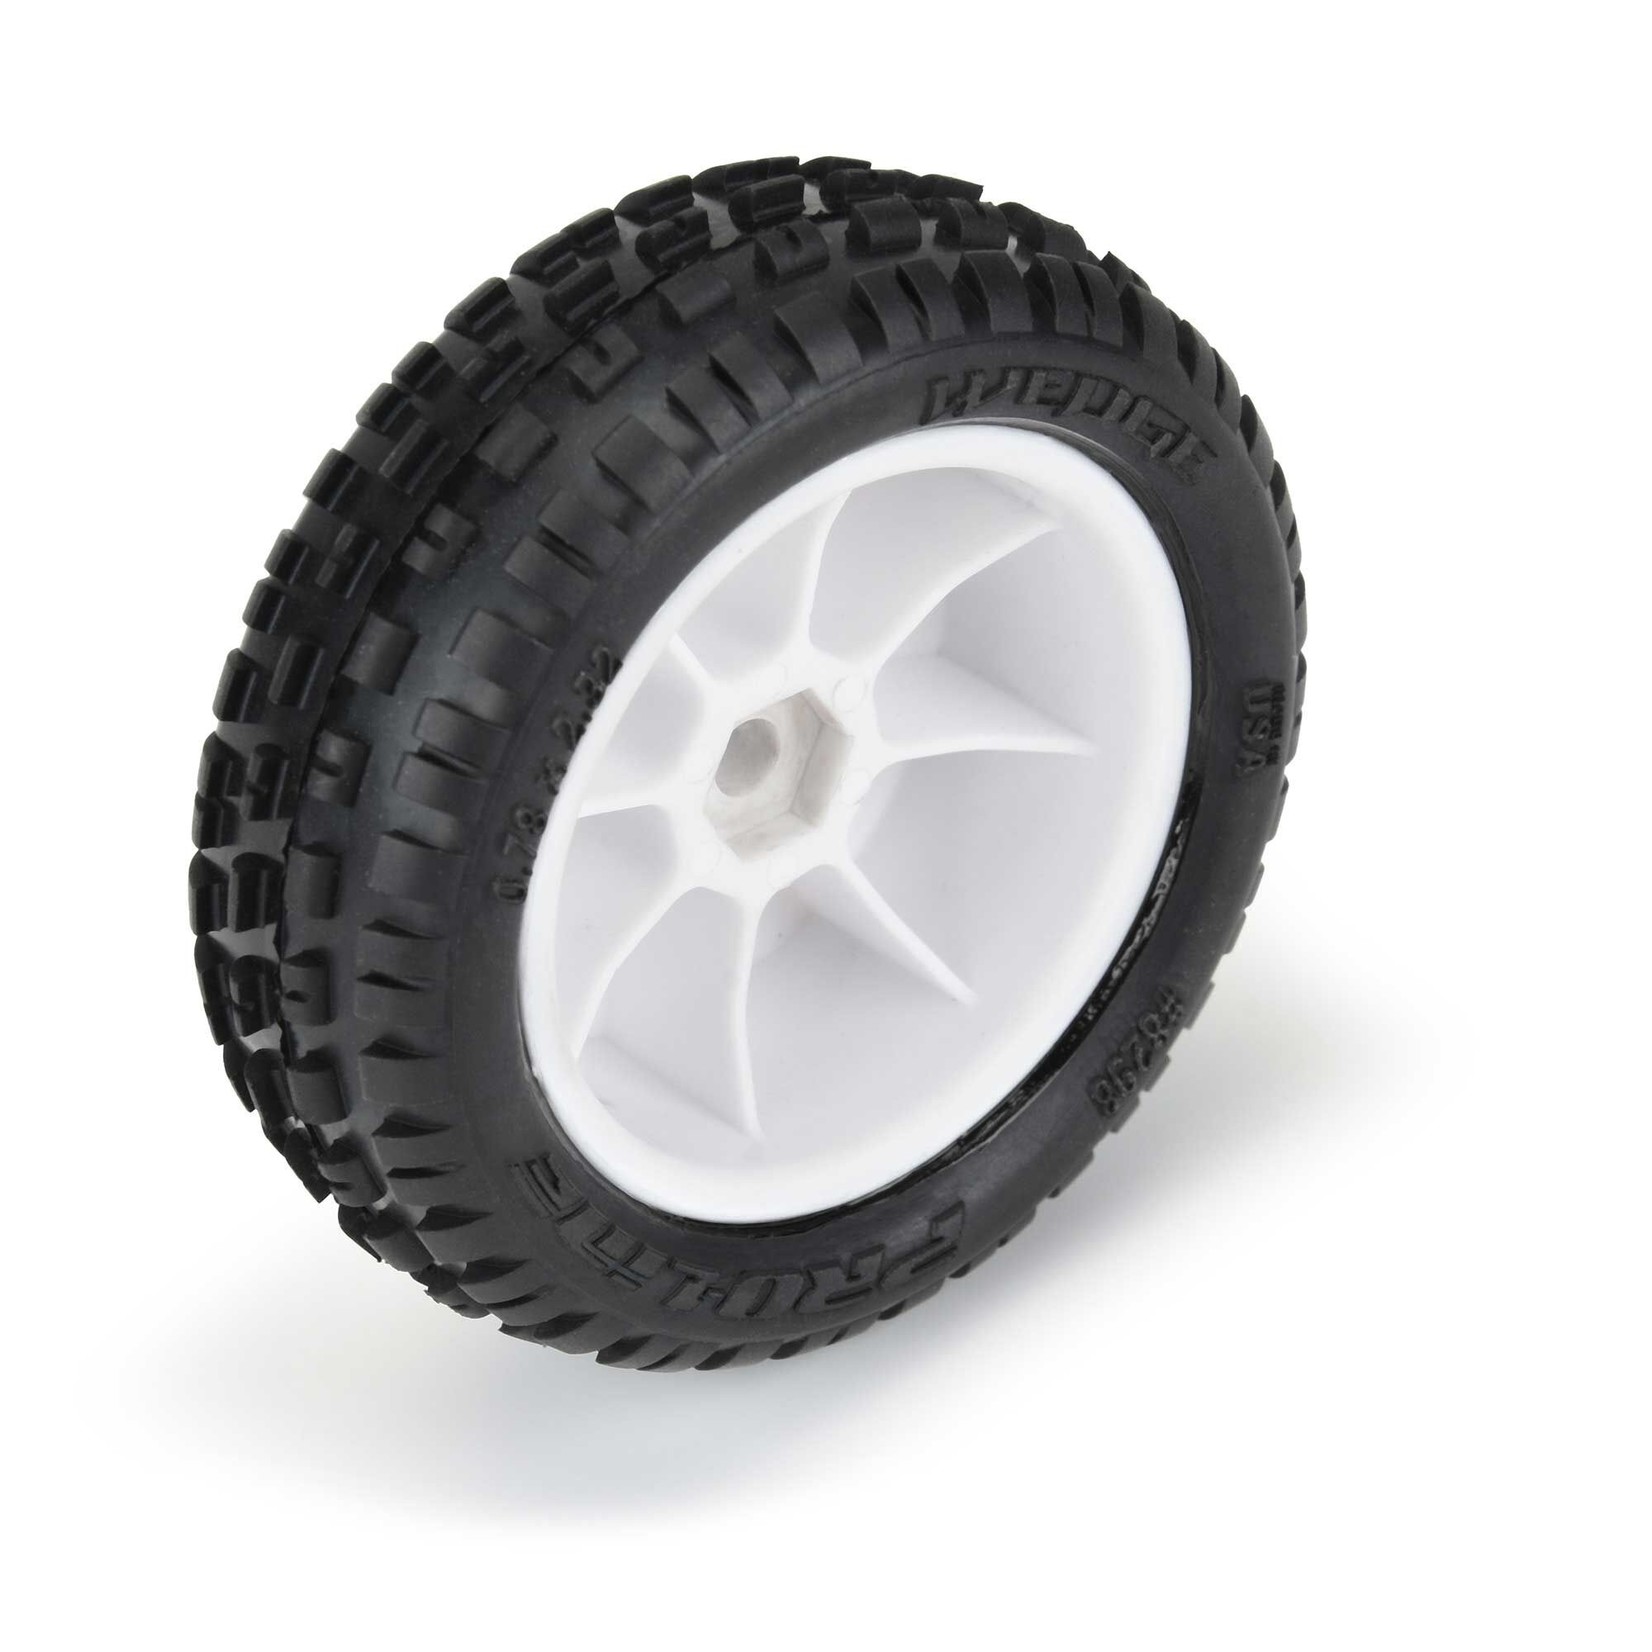 Pro-Line 1/18 Wedge Front Carpet Mini-B Tires Mounted 8mm White Wheels (2)